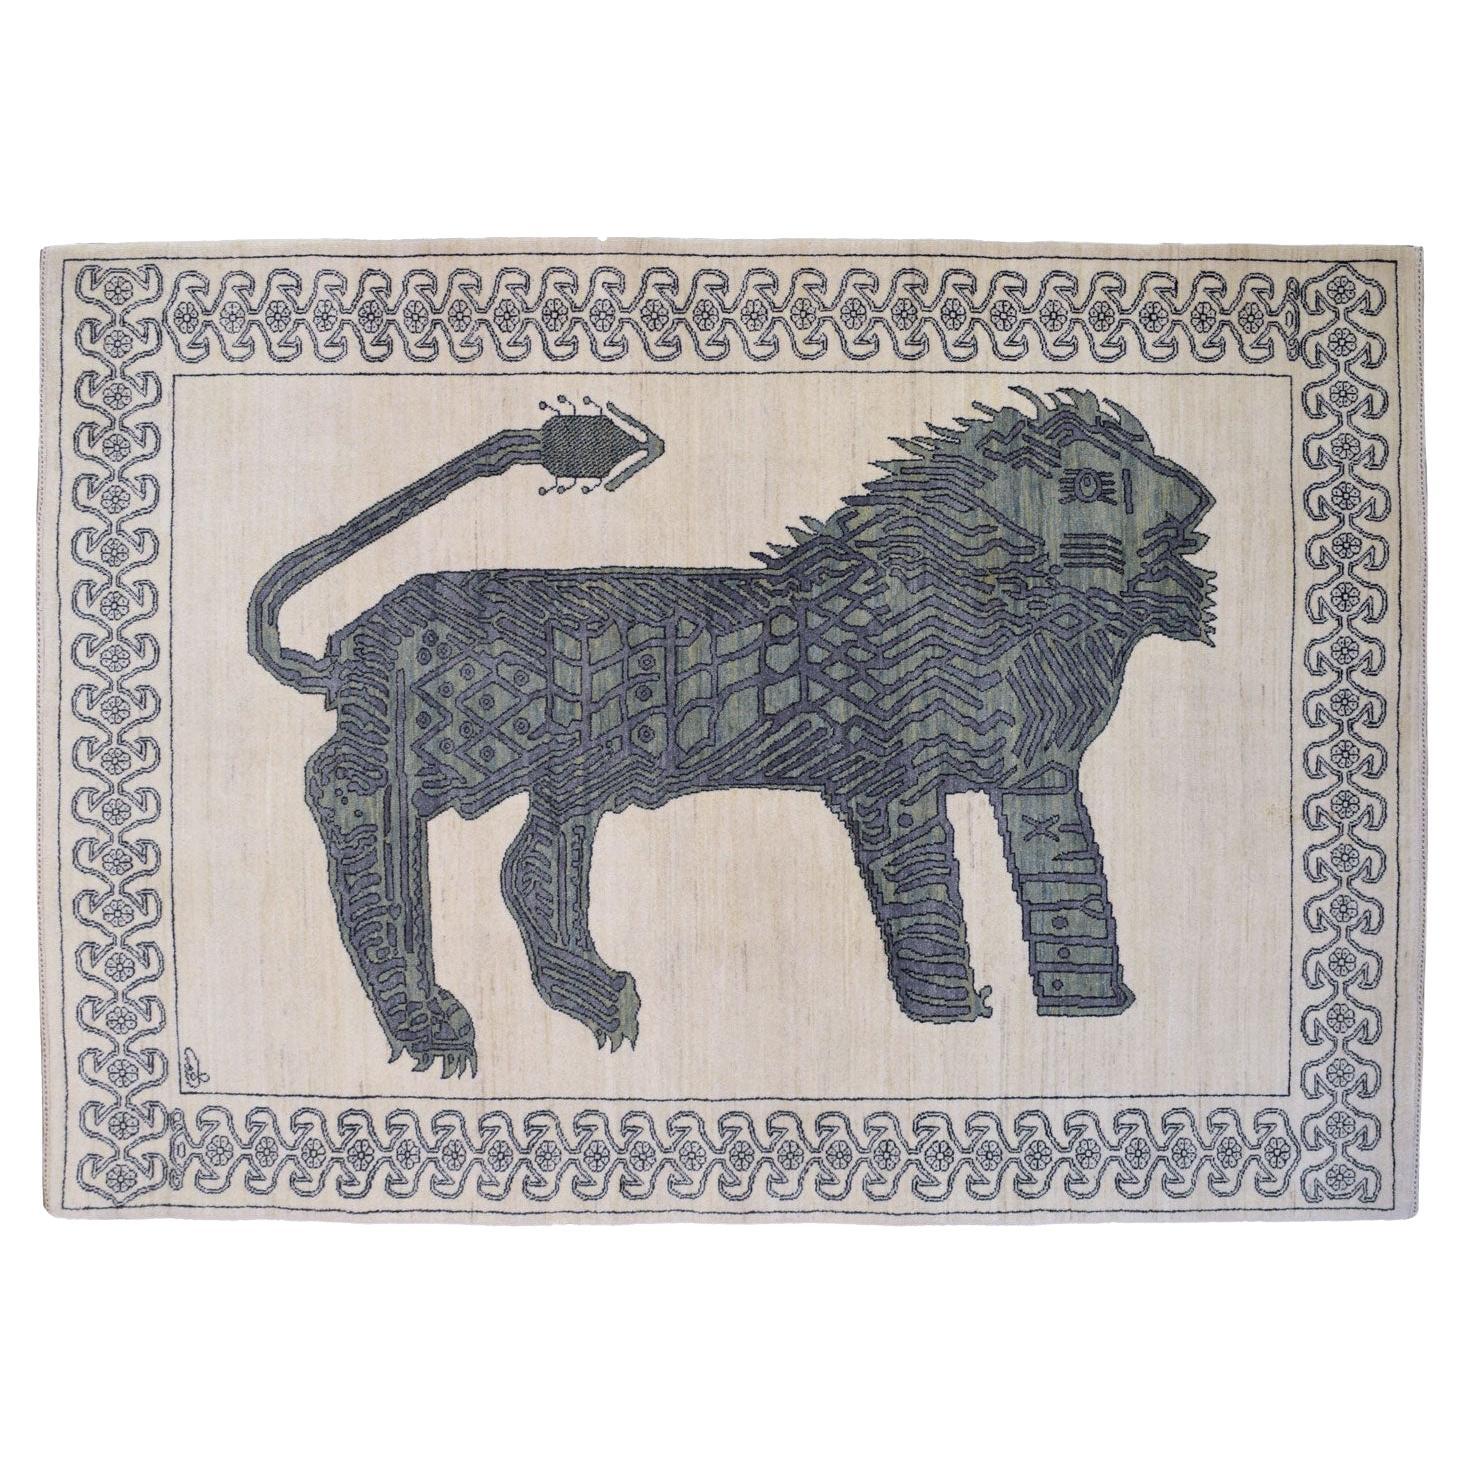 Tapis persan lion « Majesty » d'Orley Shabahang, 5' x 7'